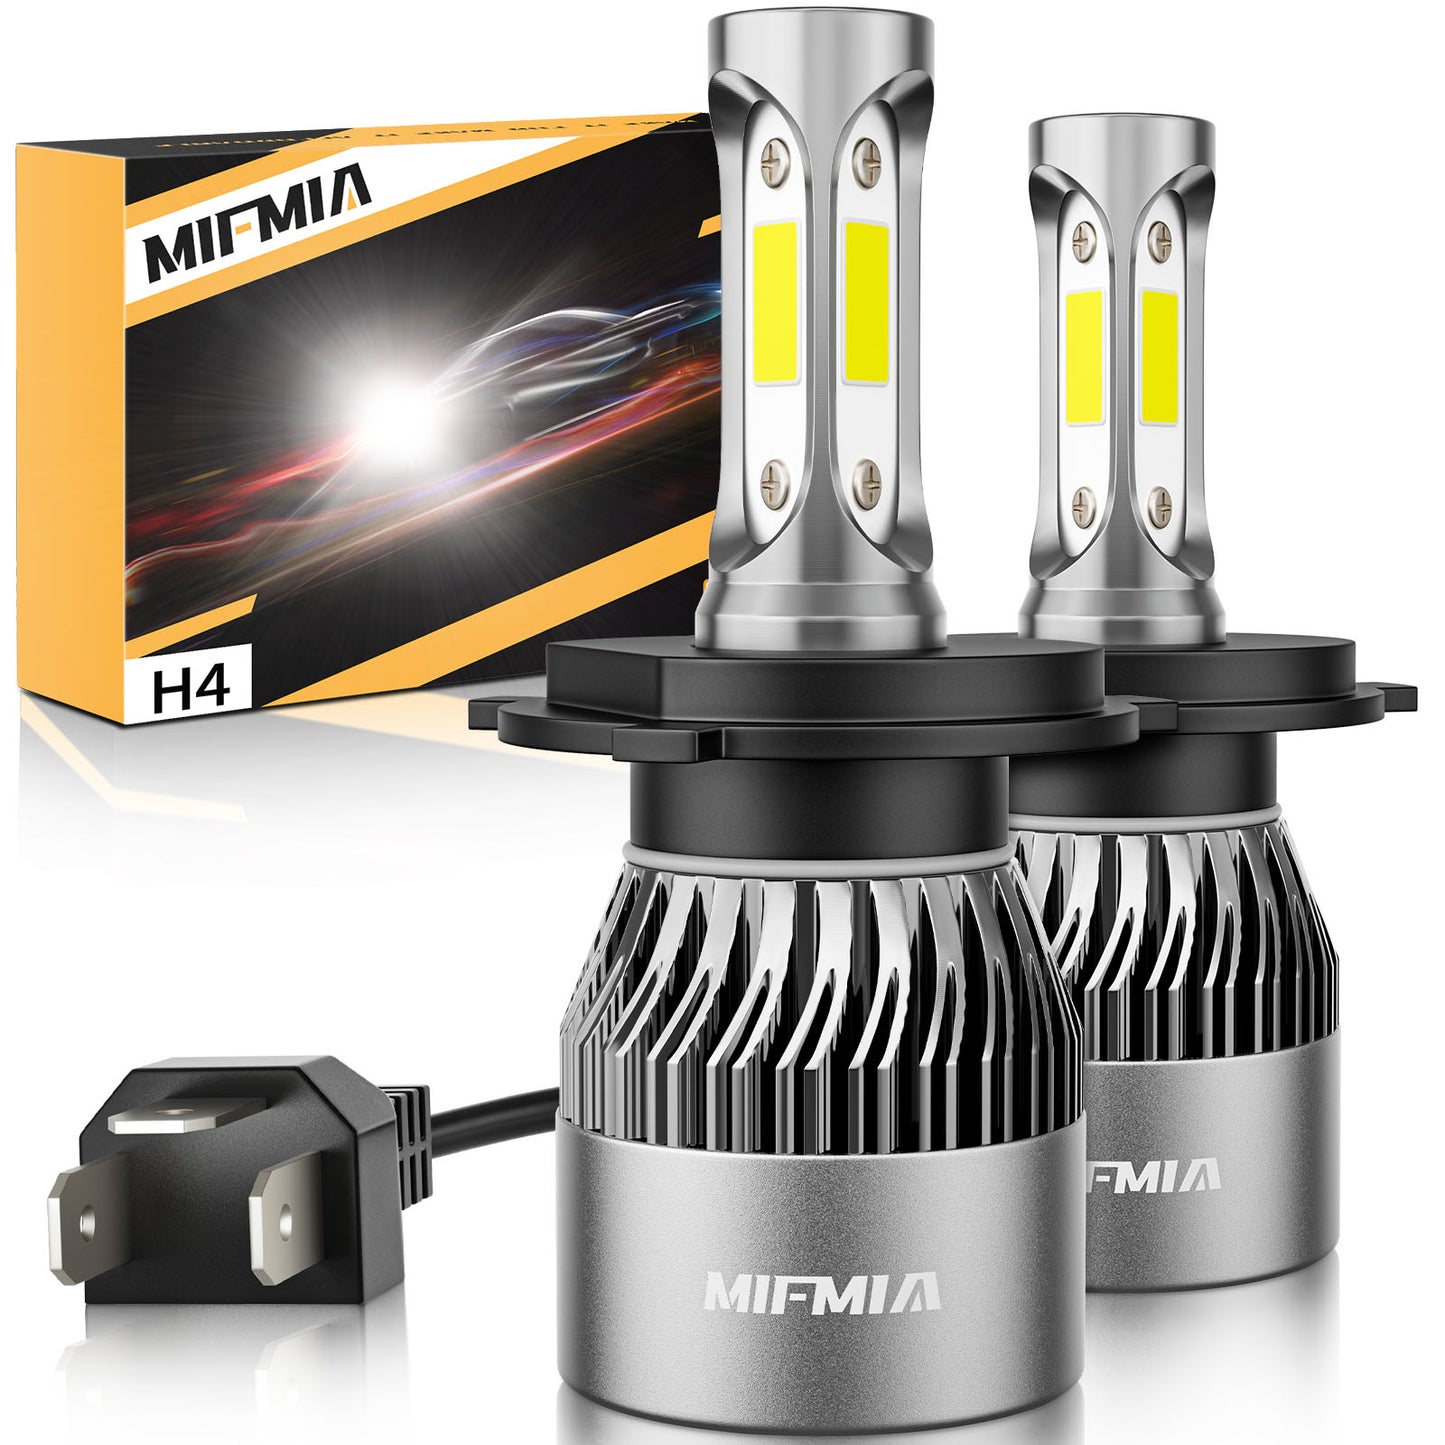 150W 30000LM Dual Color 9003/H4 LED Headlight Bulbs, 3000K+6500K  Yellow+White Hi/Lo: Low Beam(Three colors), High Beam(Only Wihte)